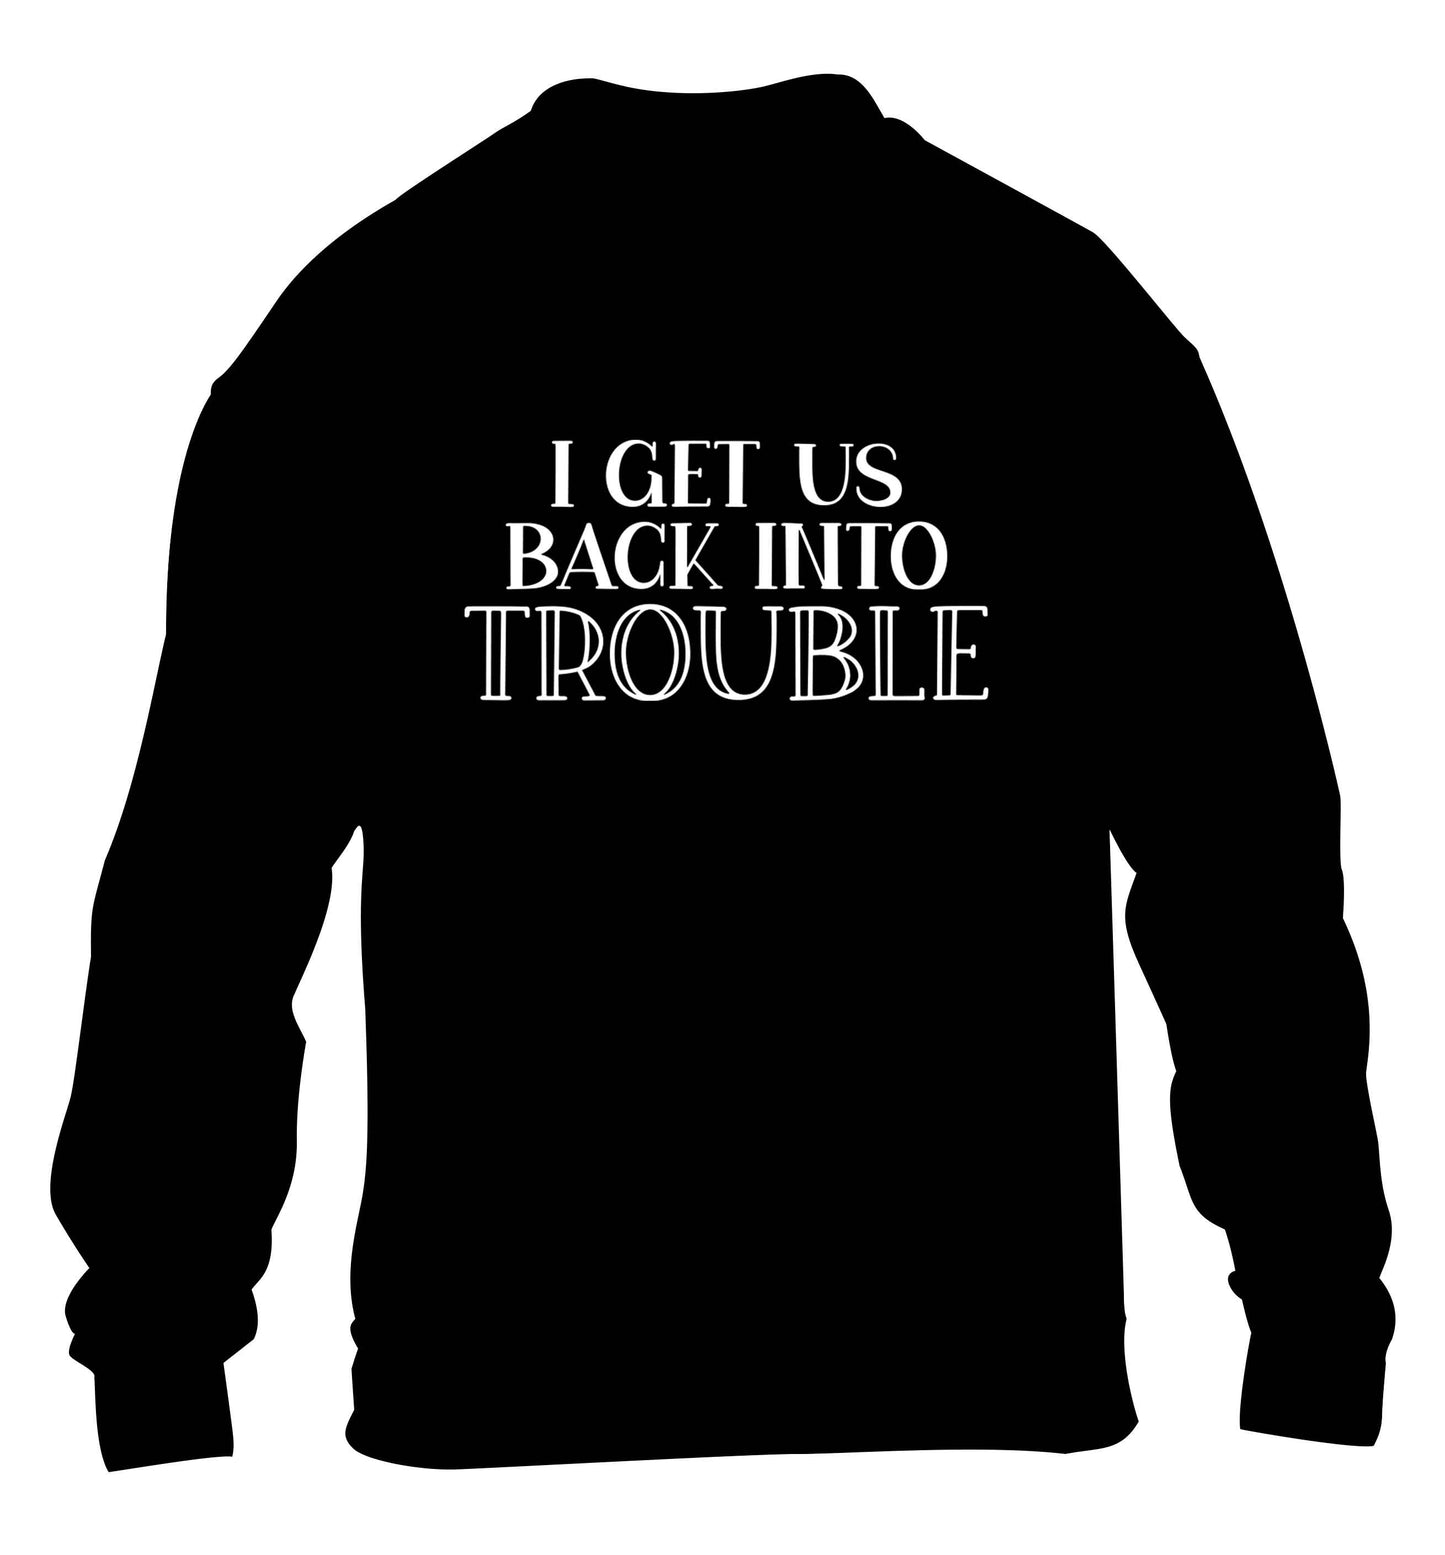 I get us back into trouble children's black sweater 12-13 Years